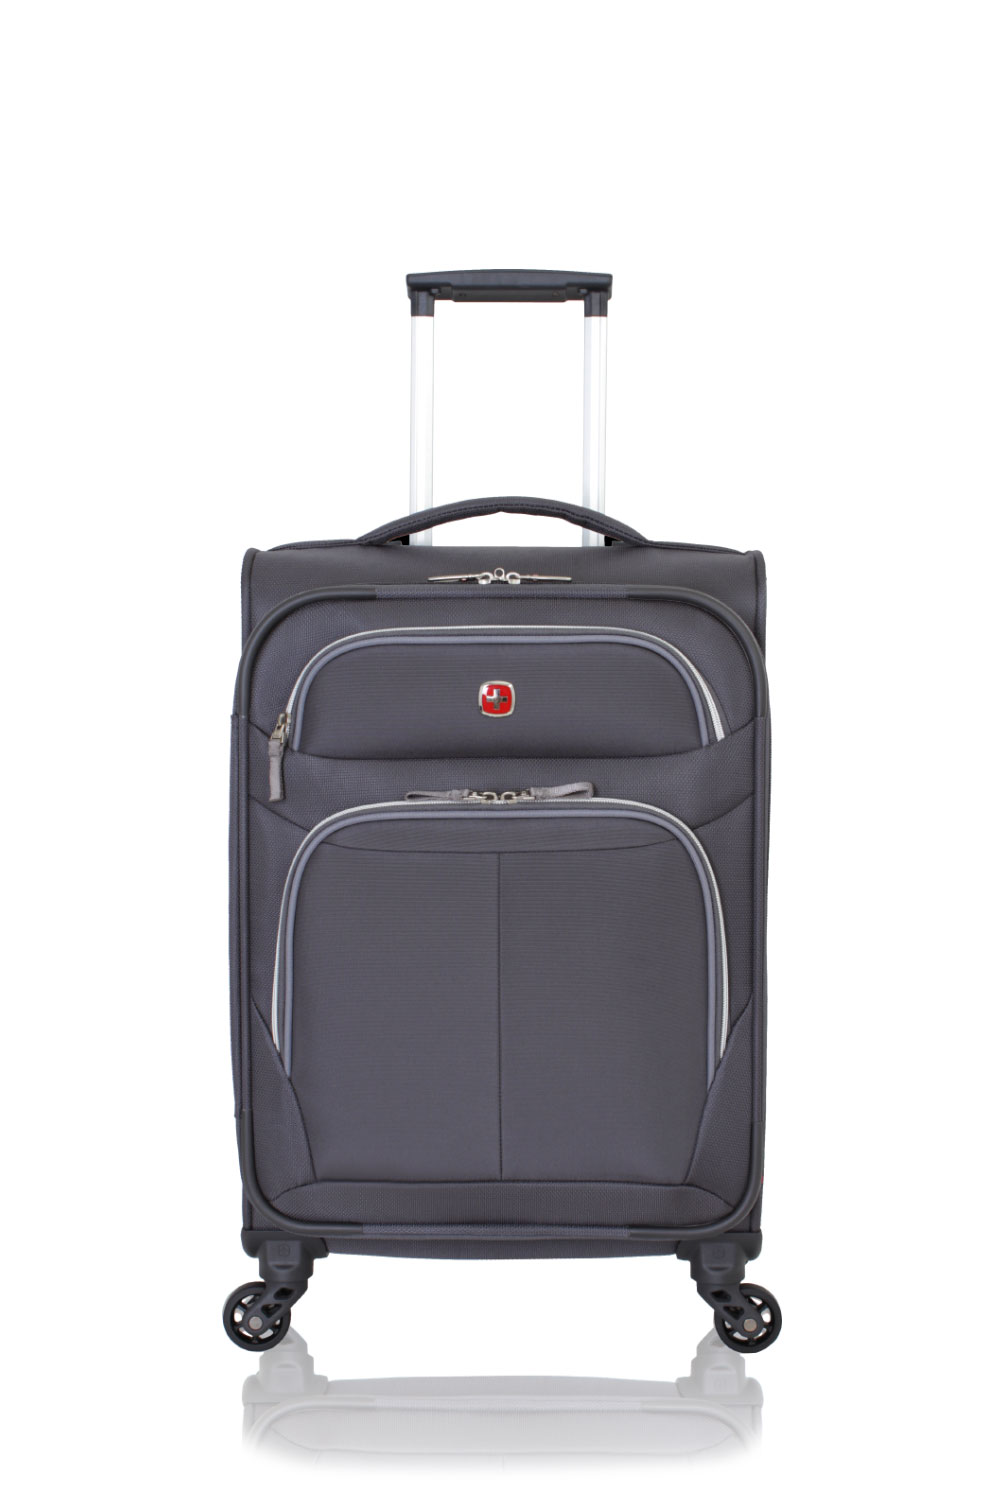 Wenger Identity Expandable Laptop Carry On Spinner Luggage - Black